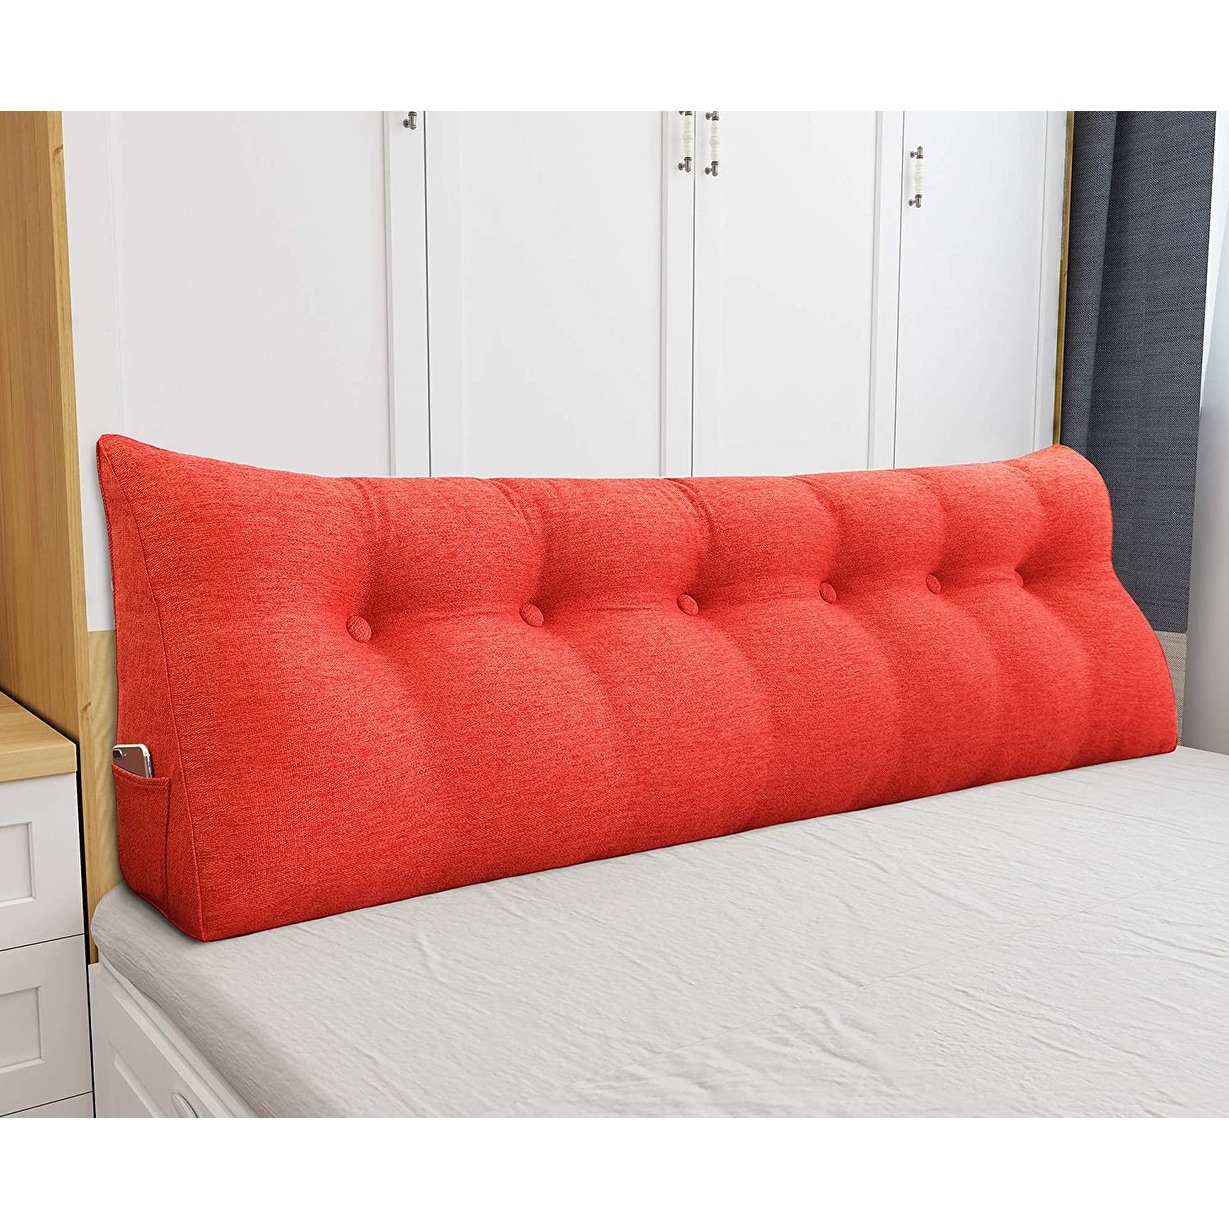 WOWMAX Large Bed Headboard Pillow Back Support Reading Wedge Cushion - On  Sale - Bed Bath & Beyond - 30356605